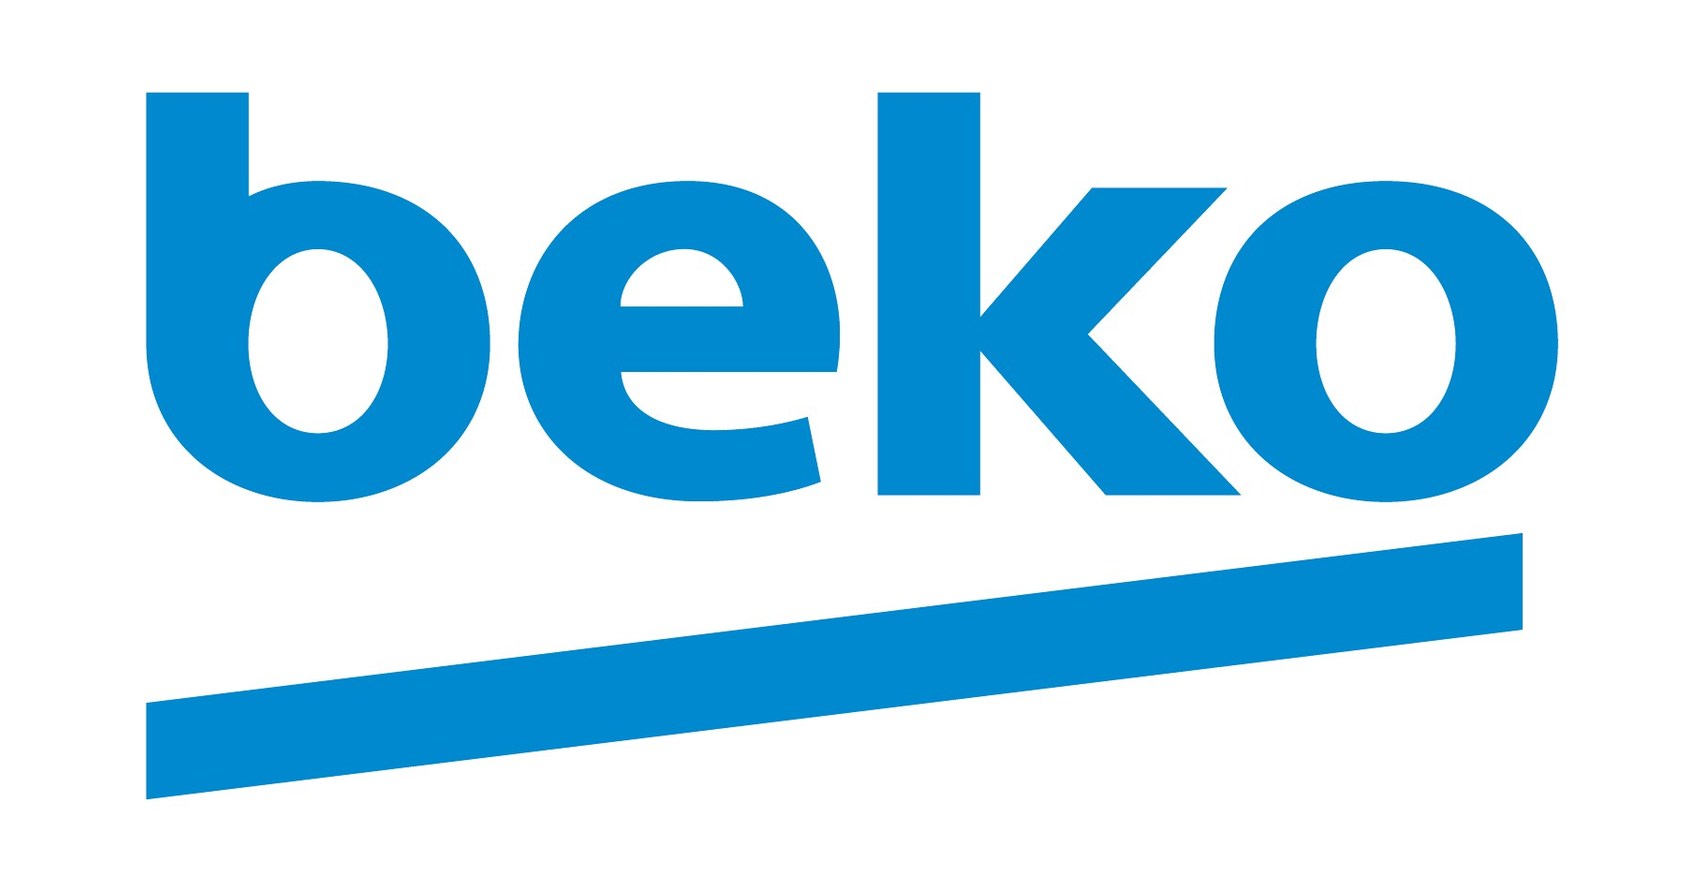 BEKO LAUNCHES THE WORLD'S FIRST DISHWASHERS THAT CLEAN THE ENTIRE WASHTUB  USING LESS WATER AND ENERGY